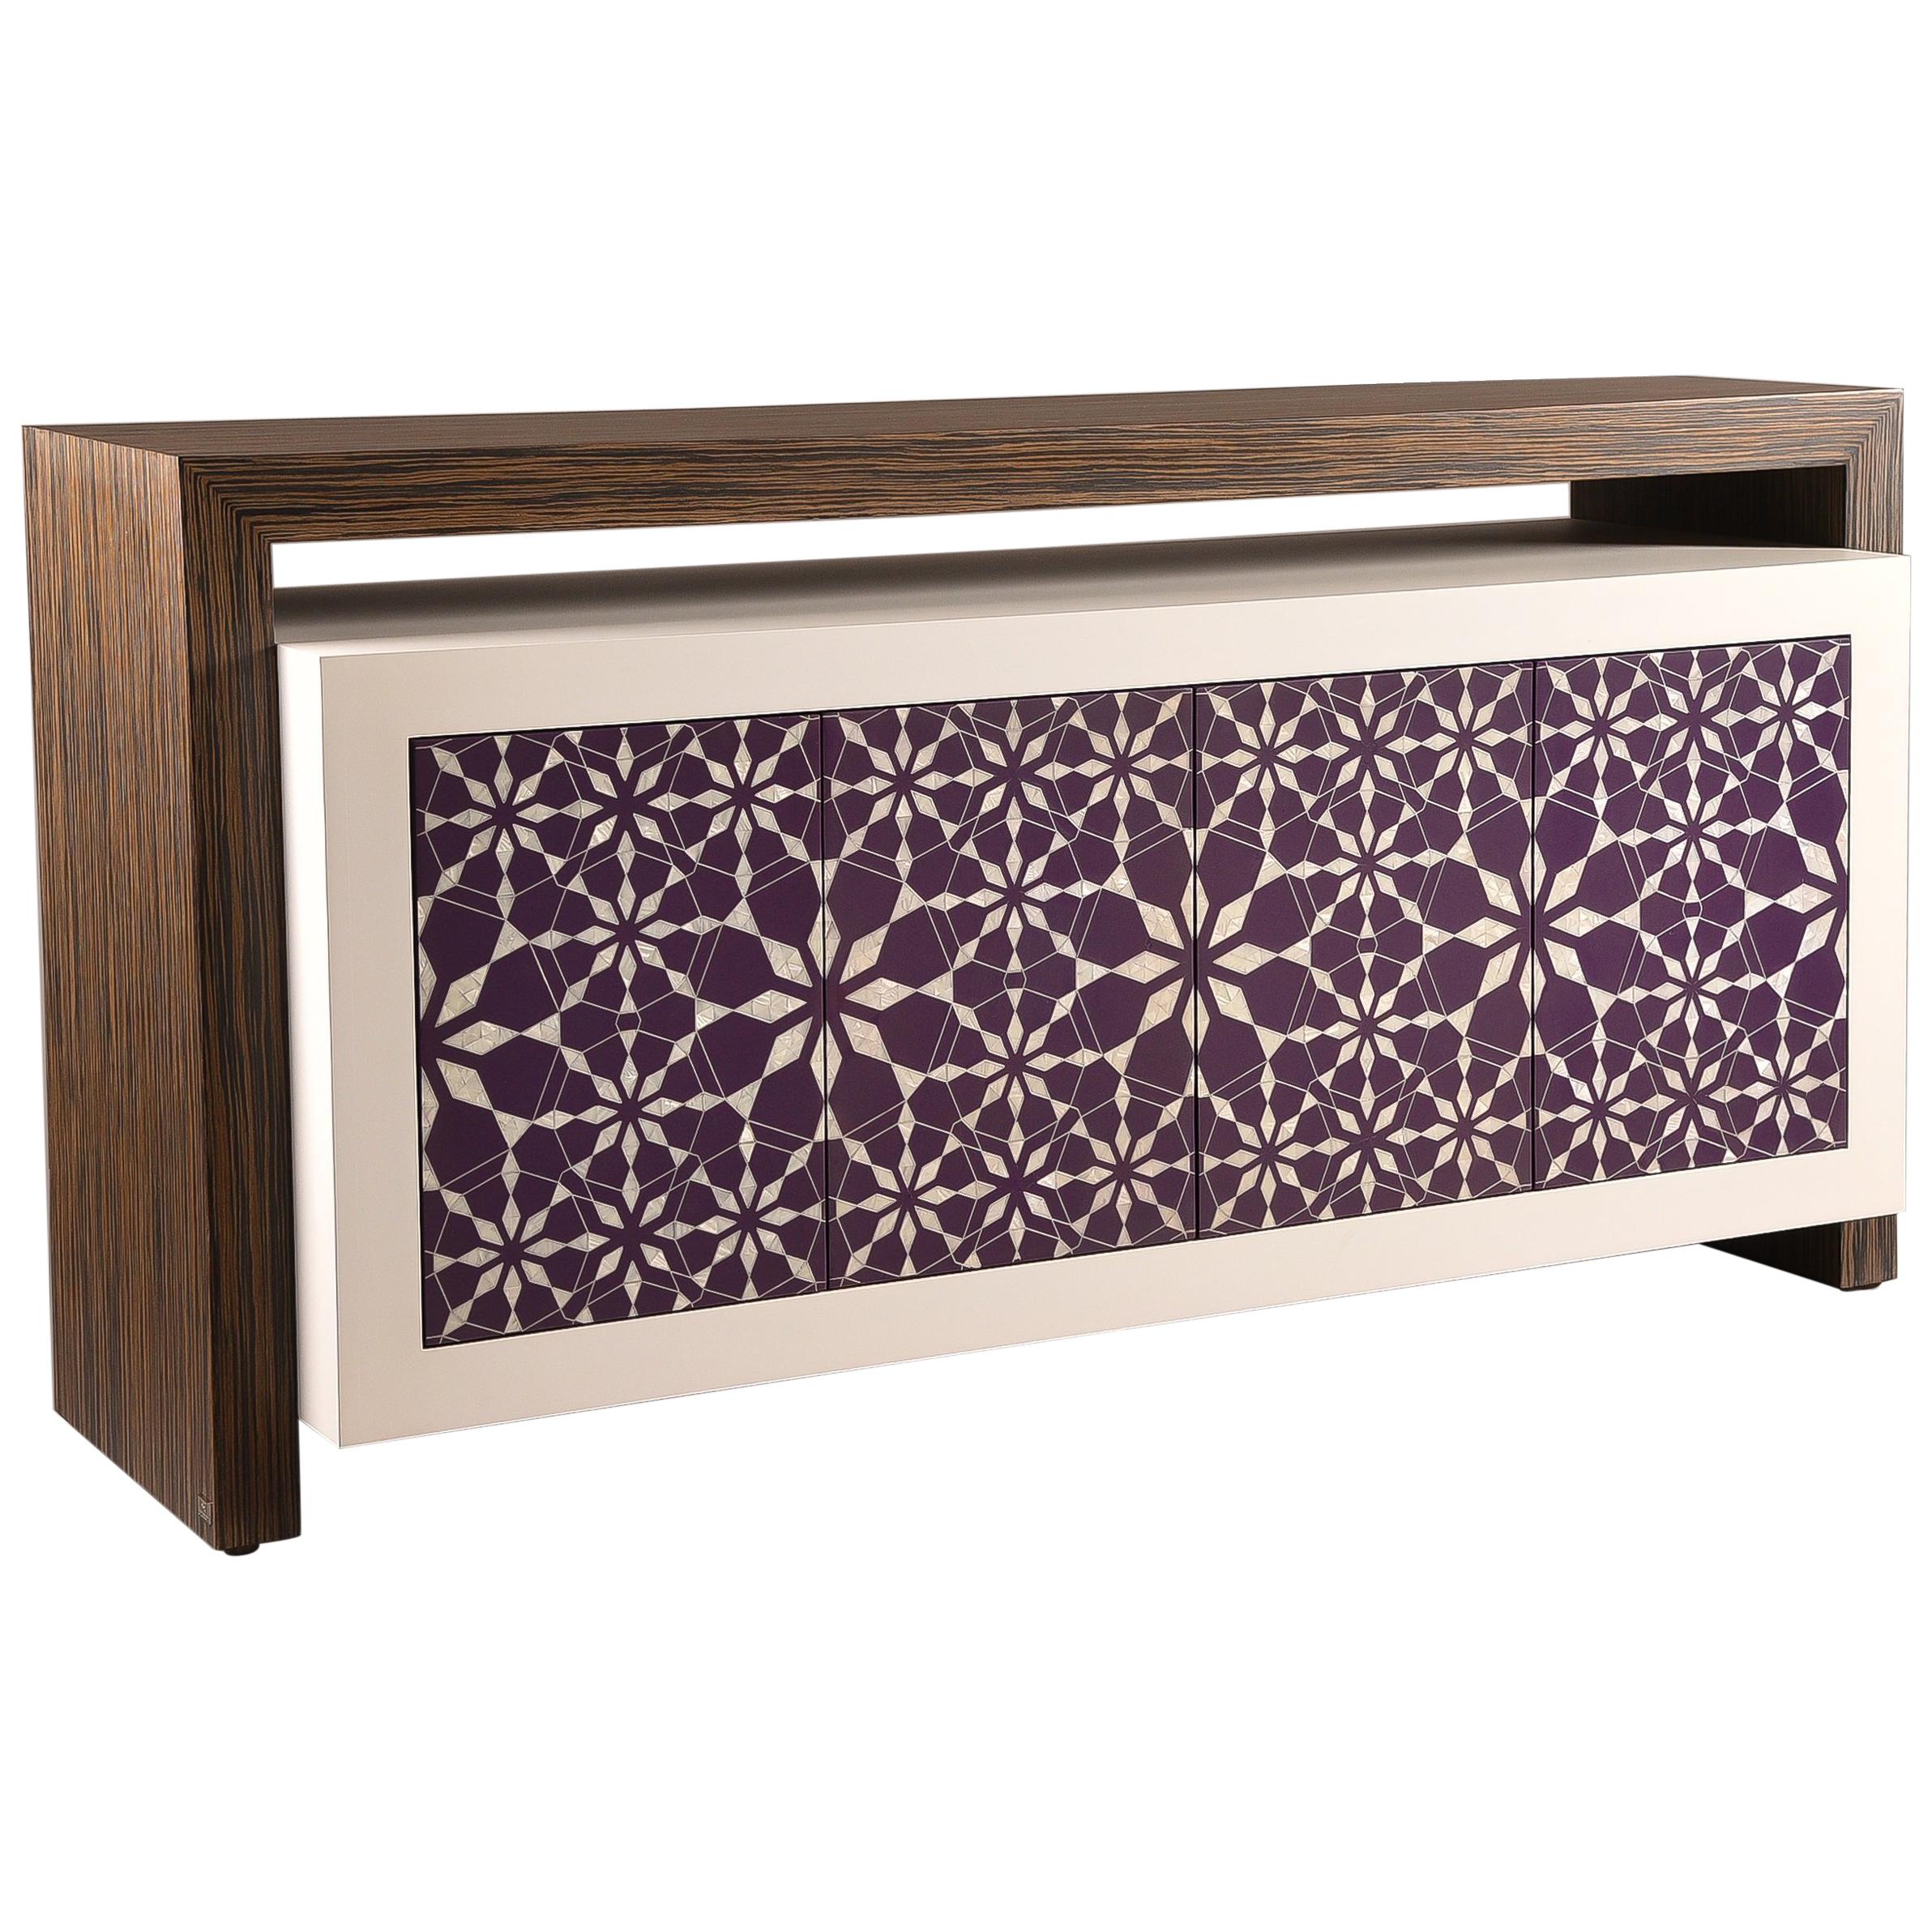 Harem Sideboard, Contemporary Sideboard in Ebony Wood and Mother-of-Pearl Inlay